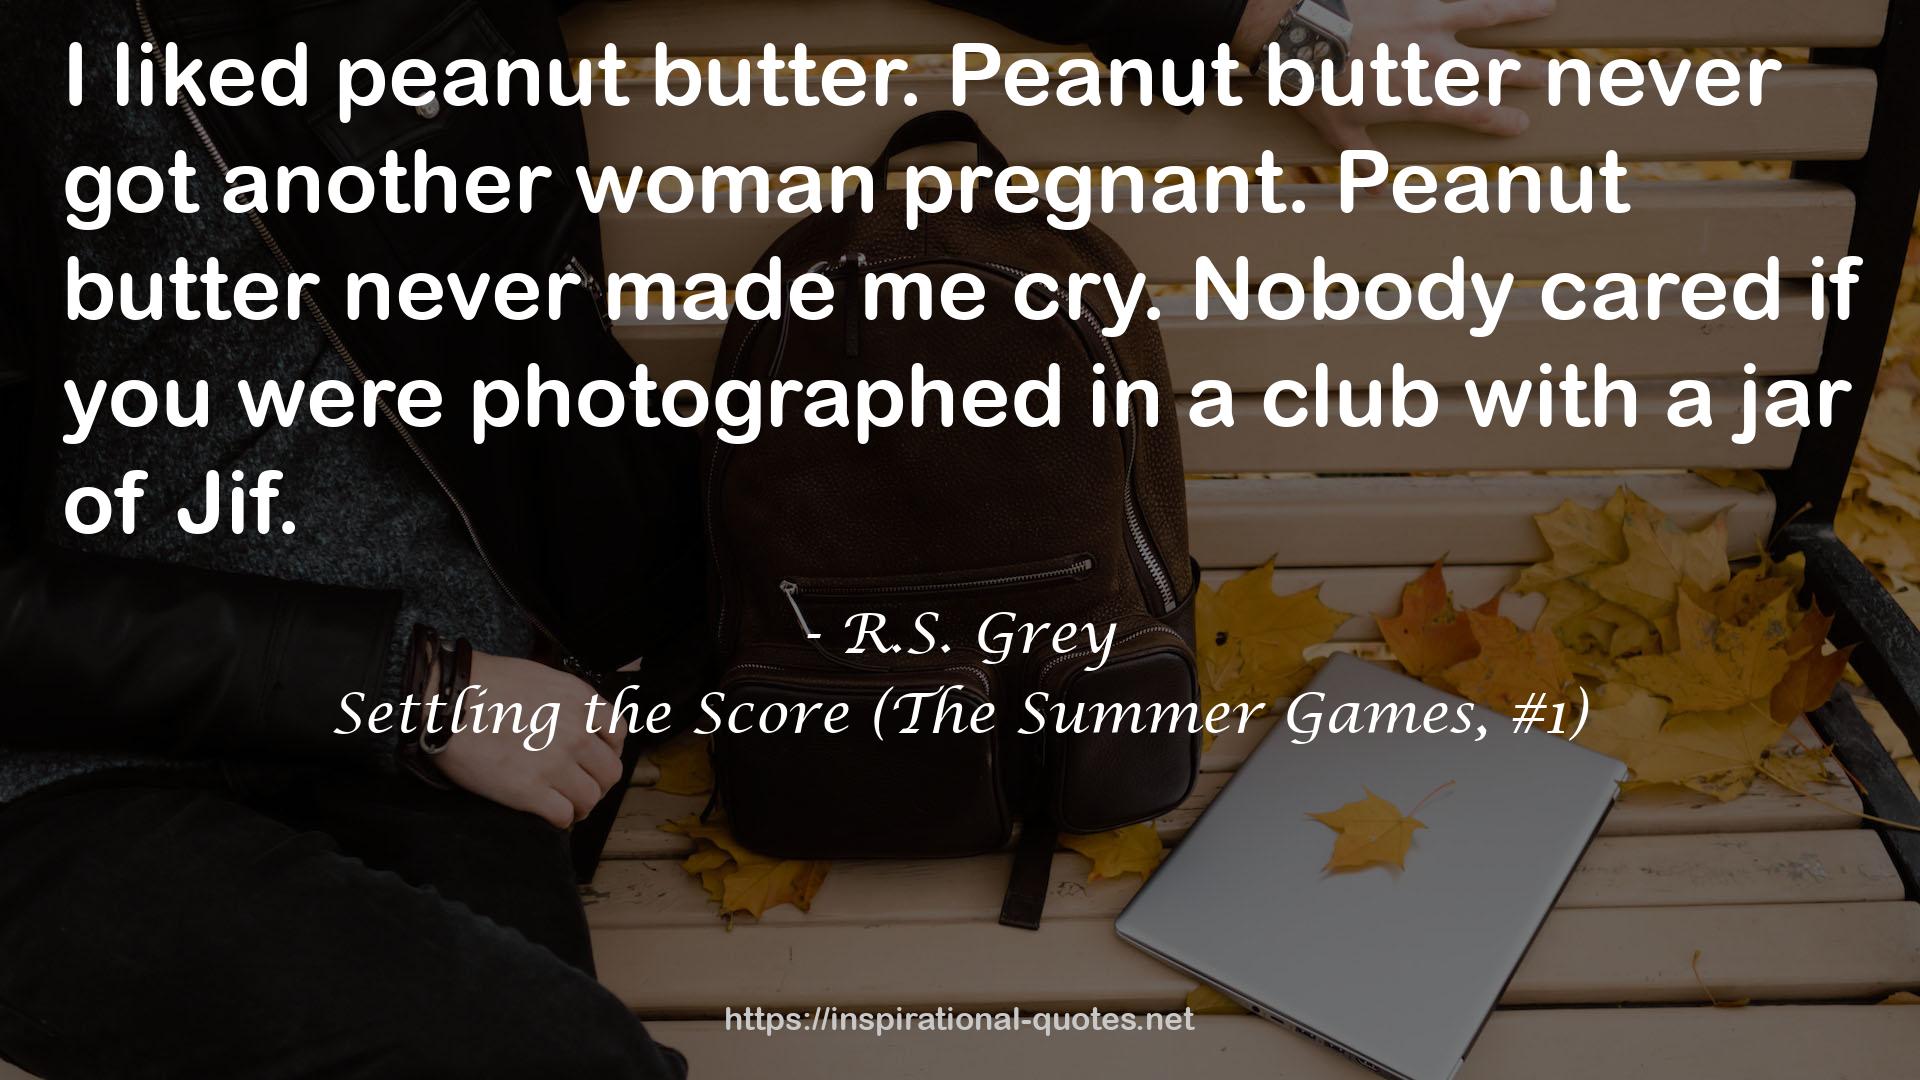 Settling the Score (The Summer Games, #1) QUOTES